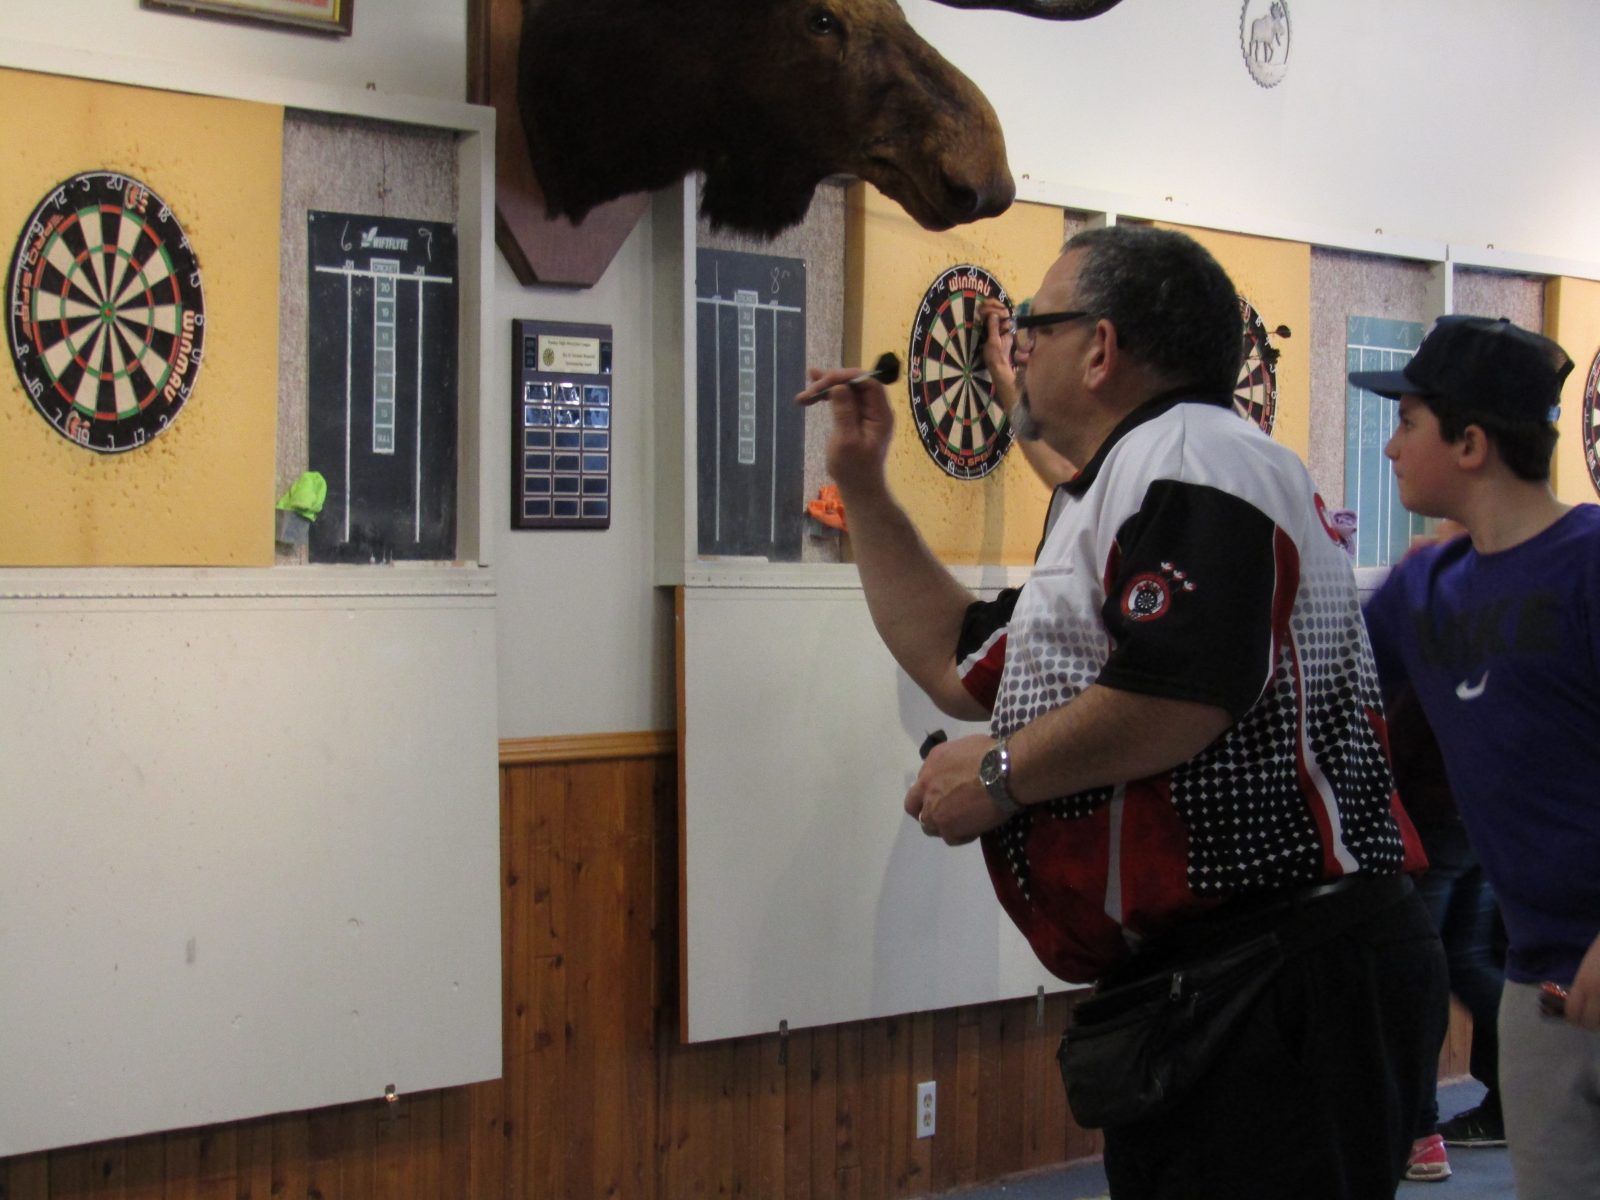 Youth Darts Club right on target